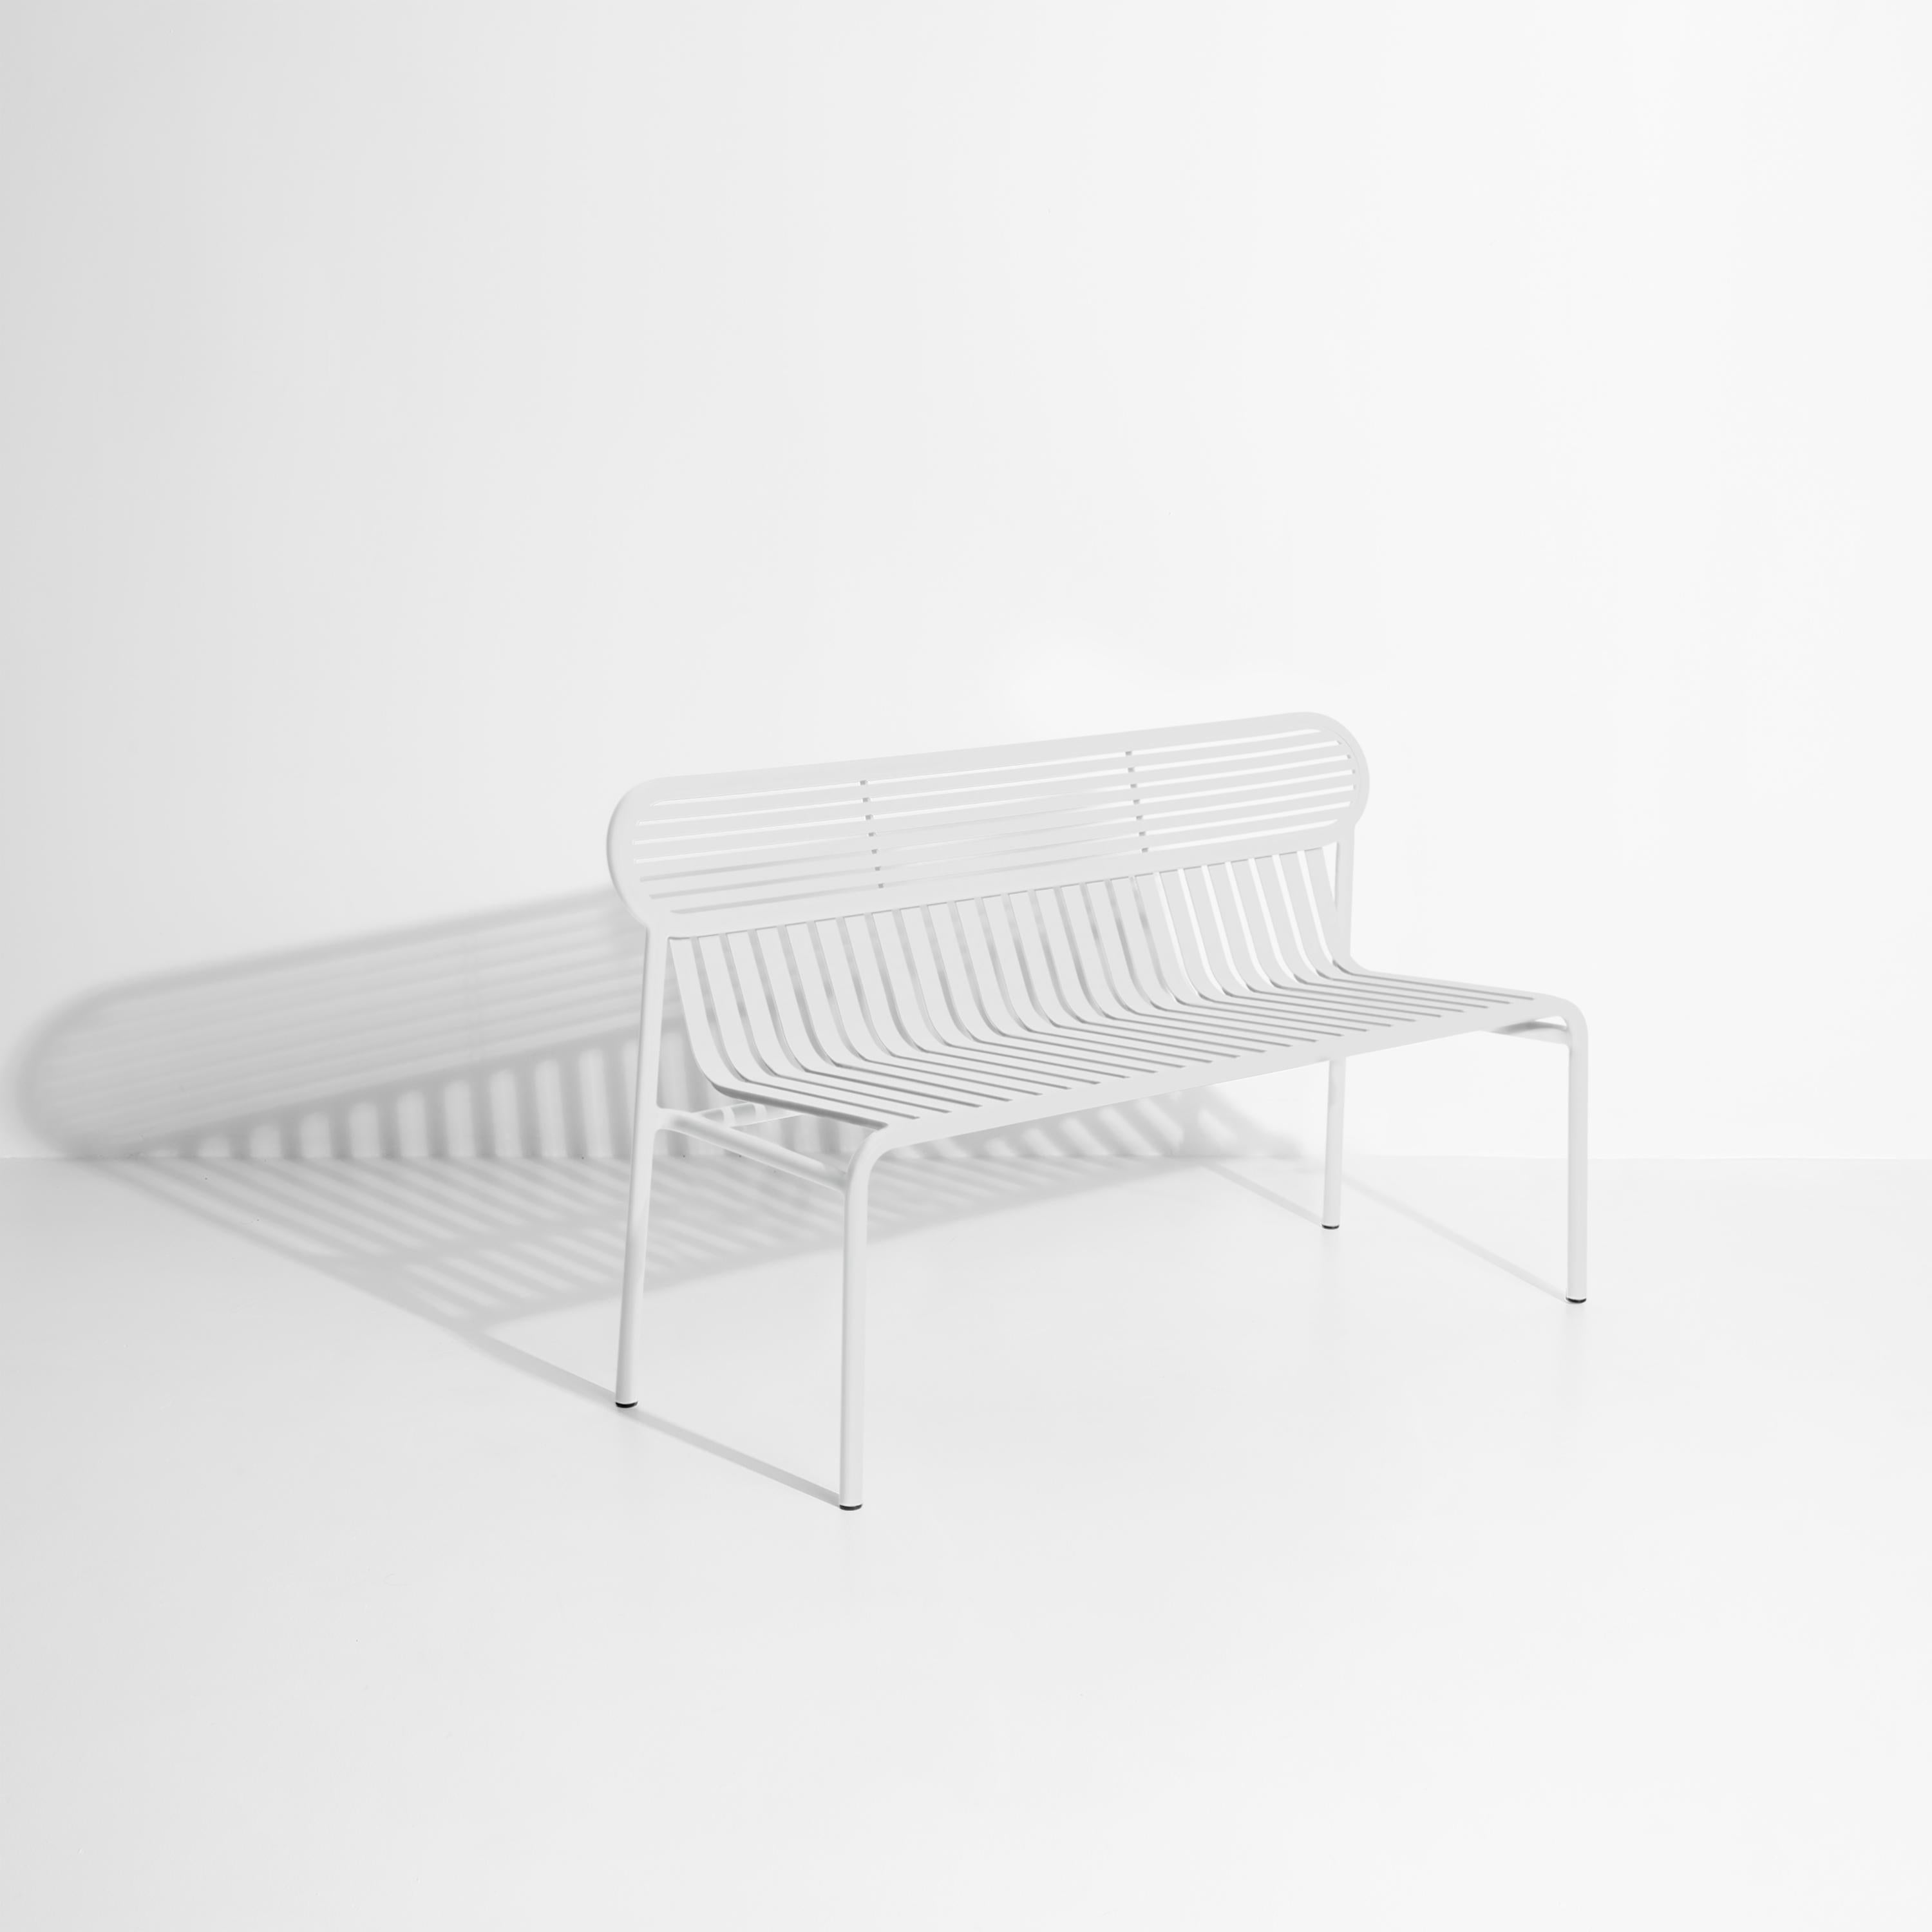 Petite Friture Week-End Bench in Pearl Grey Aluminium by Studio BrichetZiegler, 2017

The week-end collection is a full range of outdoor furniture, in aluminium grained epoxy paint, matt finish, that includes 18 functions and 8 colours for the